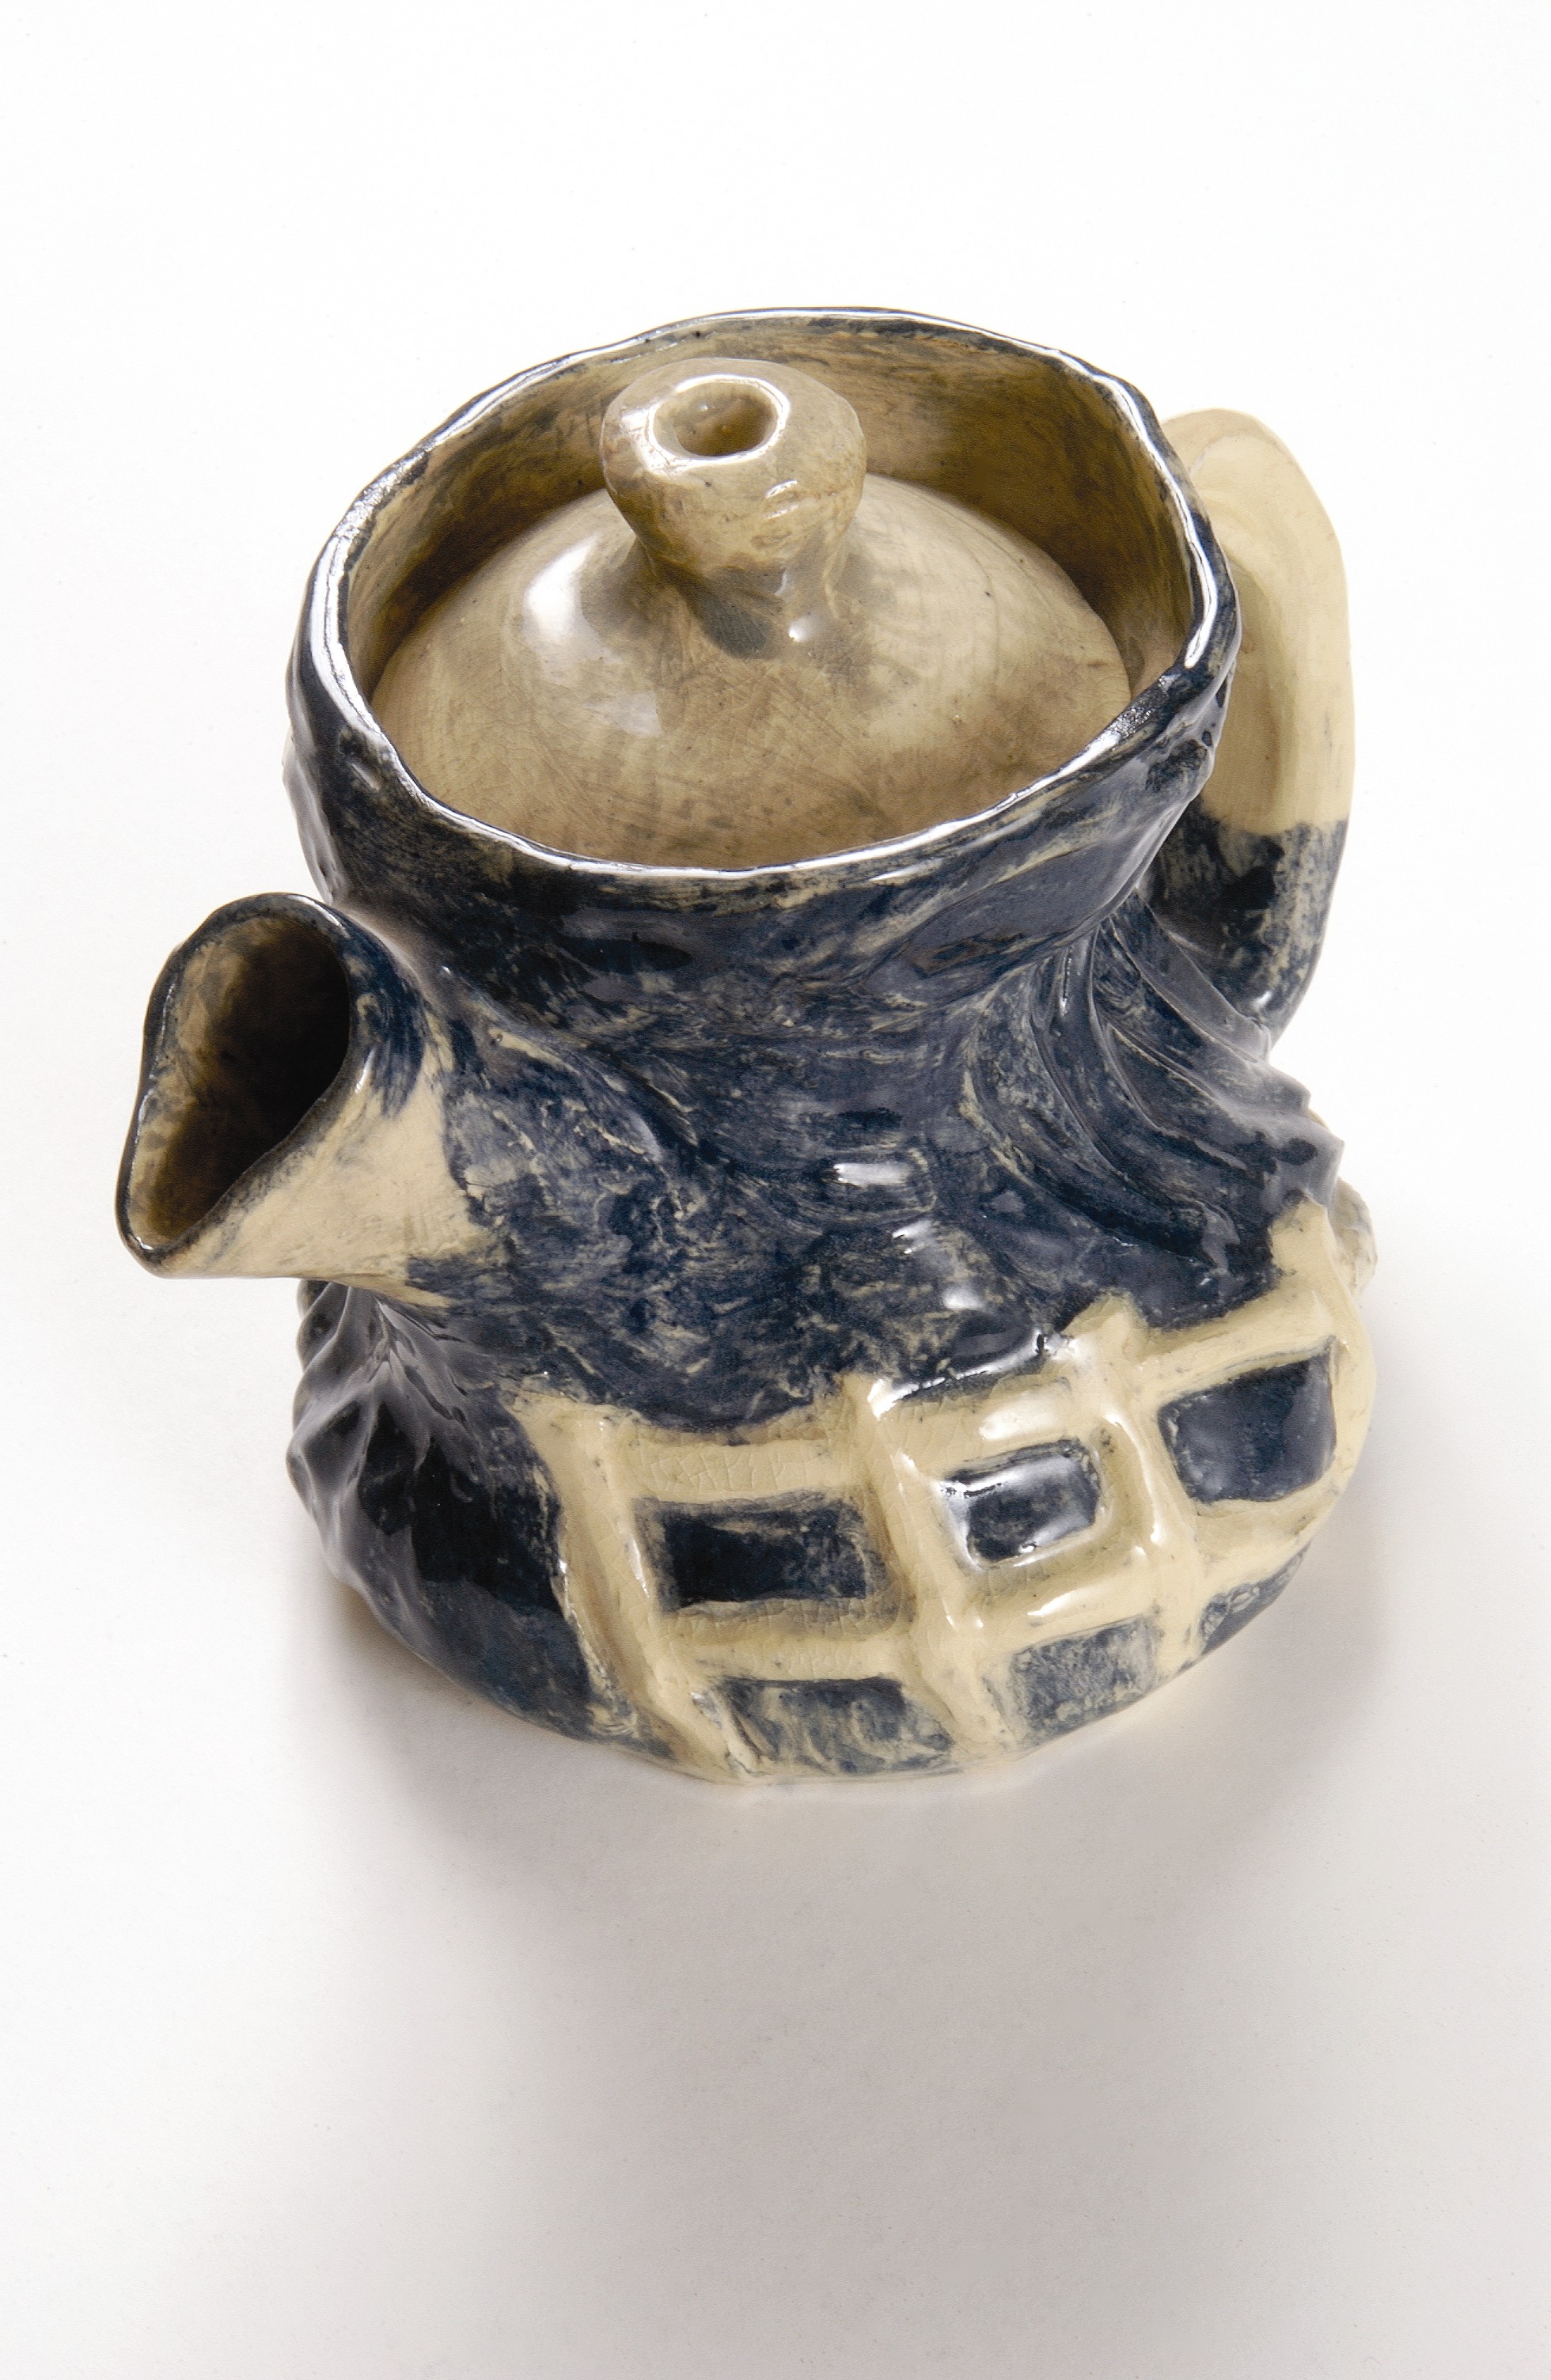 William Merric Boyd, Teapot 1947 earthenware and glaze, 15 cm (height) Glen Eira City Council Art Collection, purchased 1992.